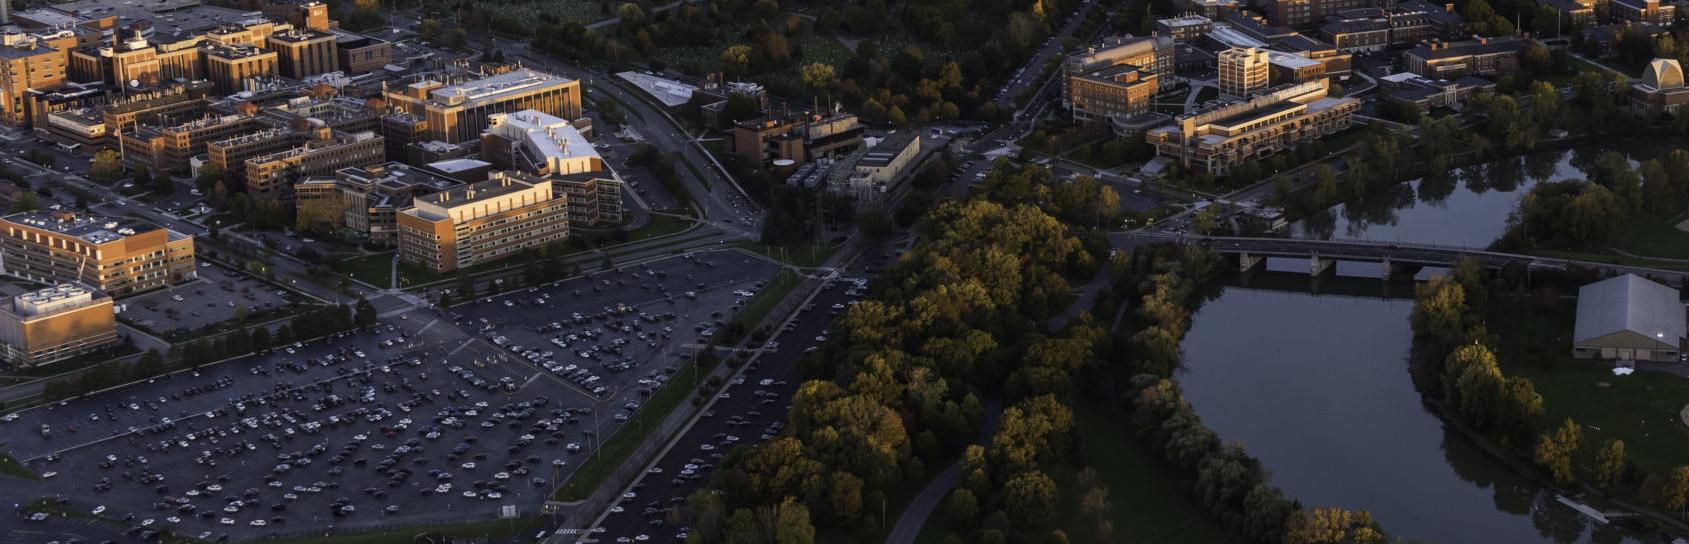 Aerial photo of University of Rochester's River Campus and Medical Center along with downtown Rochester, NY in in the evening